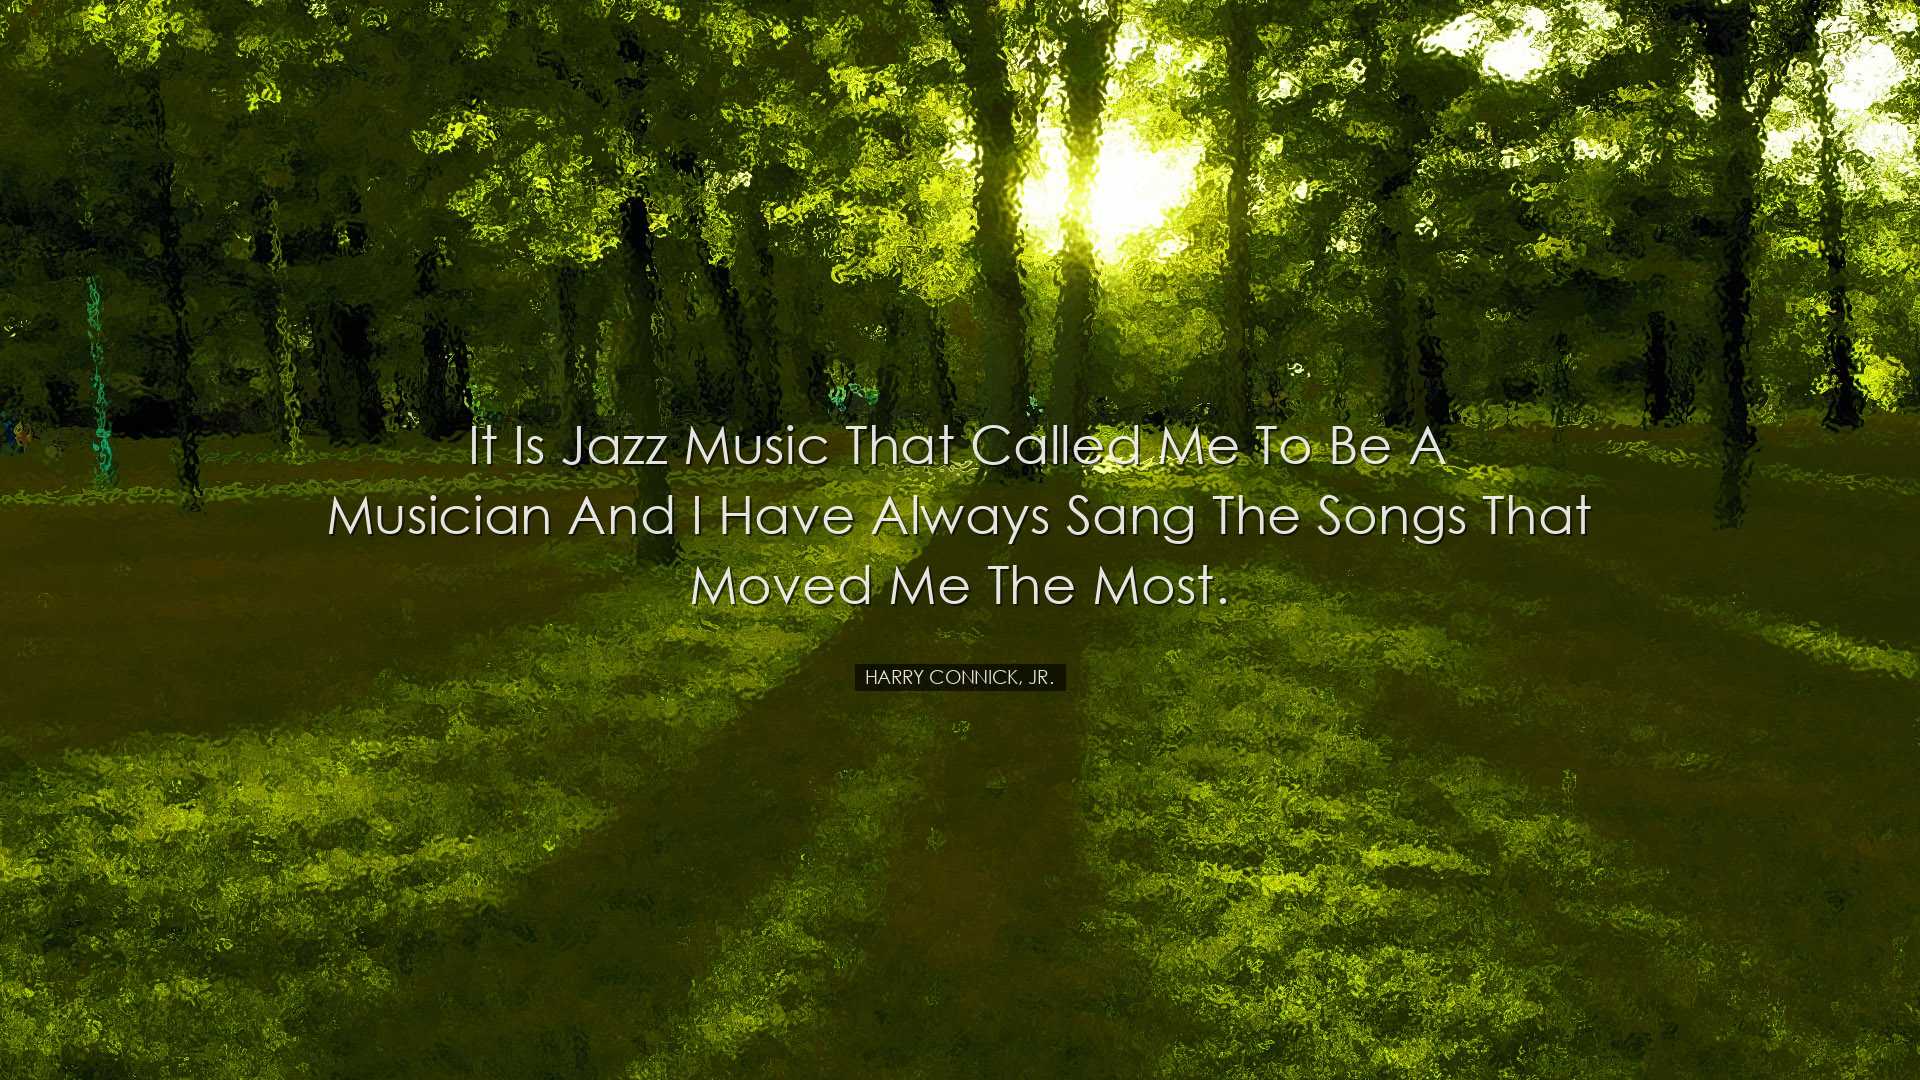 It is jazz music that called me to be a musician and I have always